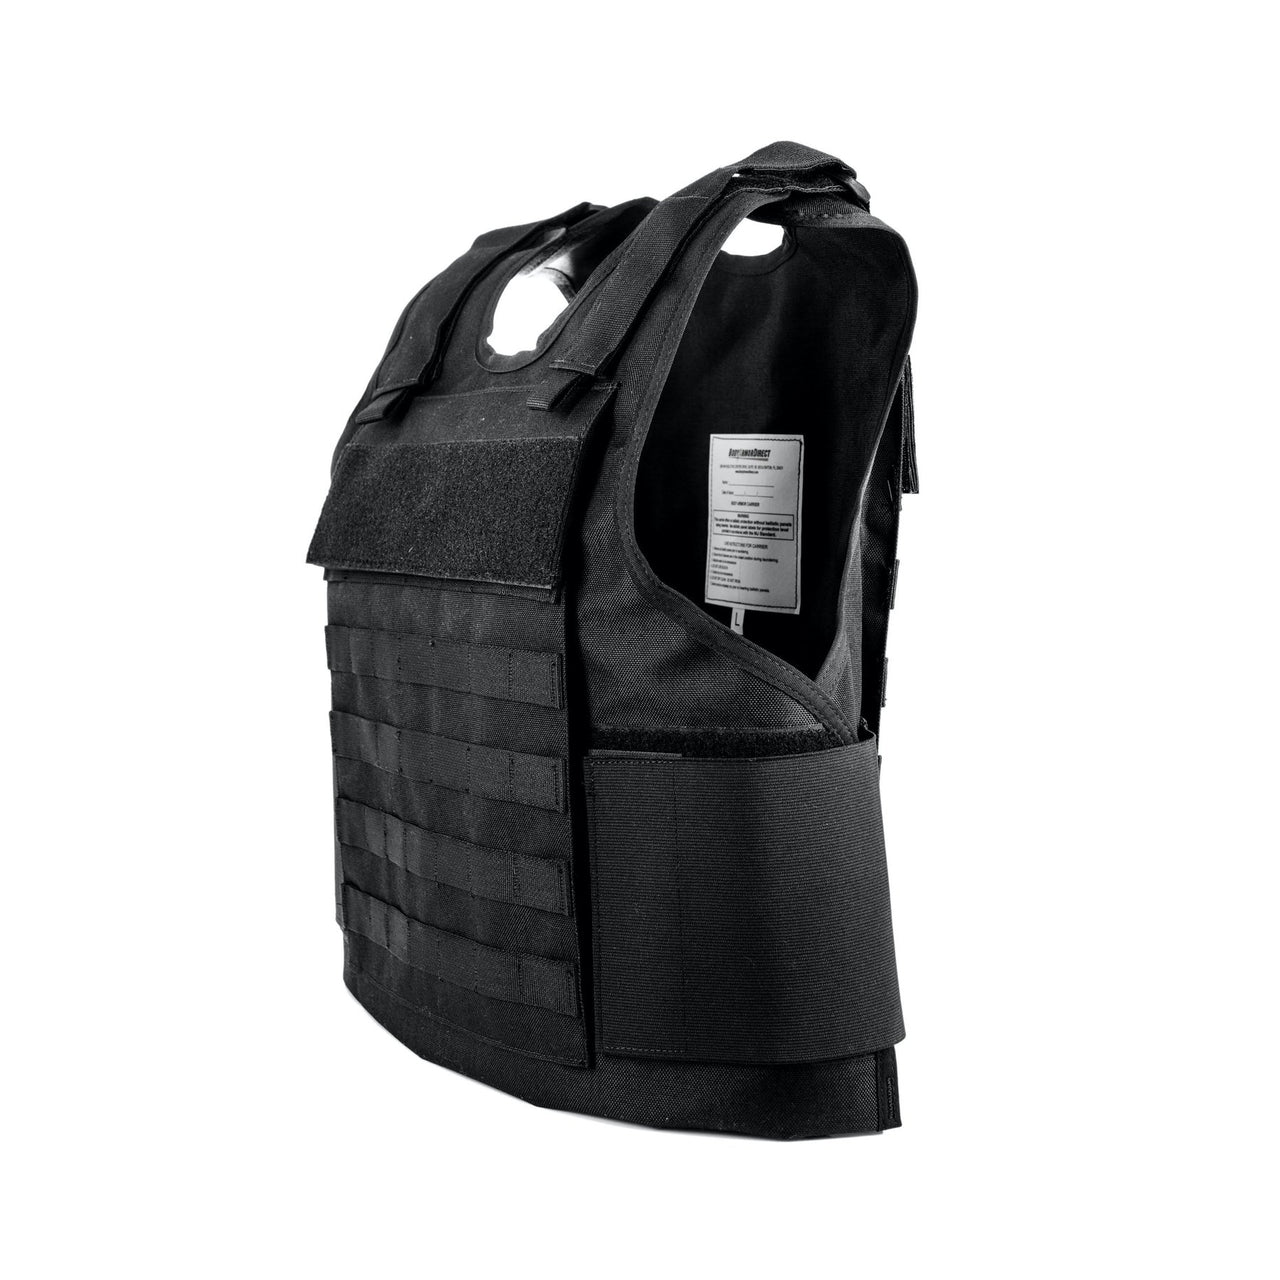 A Body Armor Direct All Star Tactical Enhanced Multi-Threat Vest from Body Armor Direct on a white background.